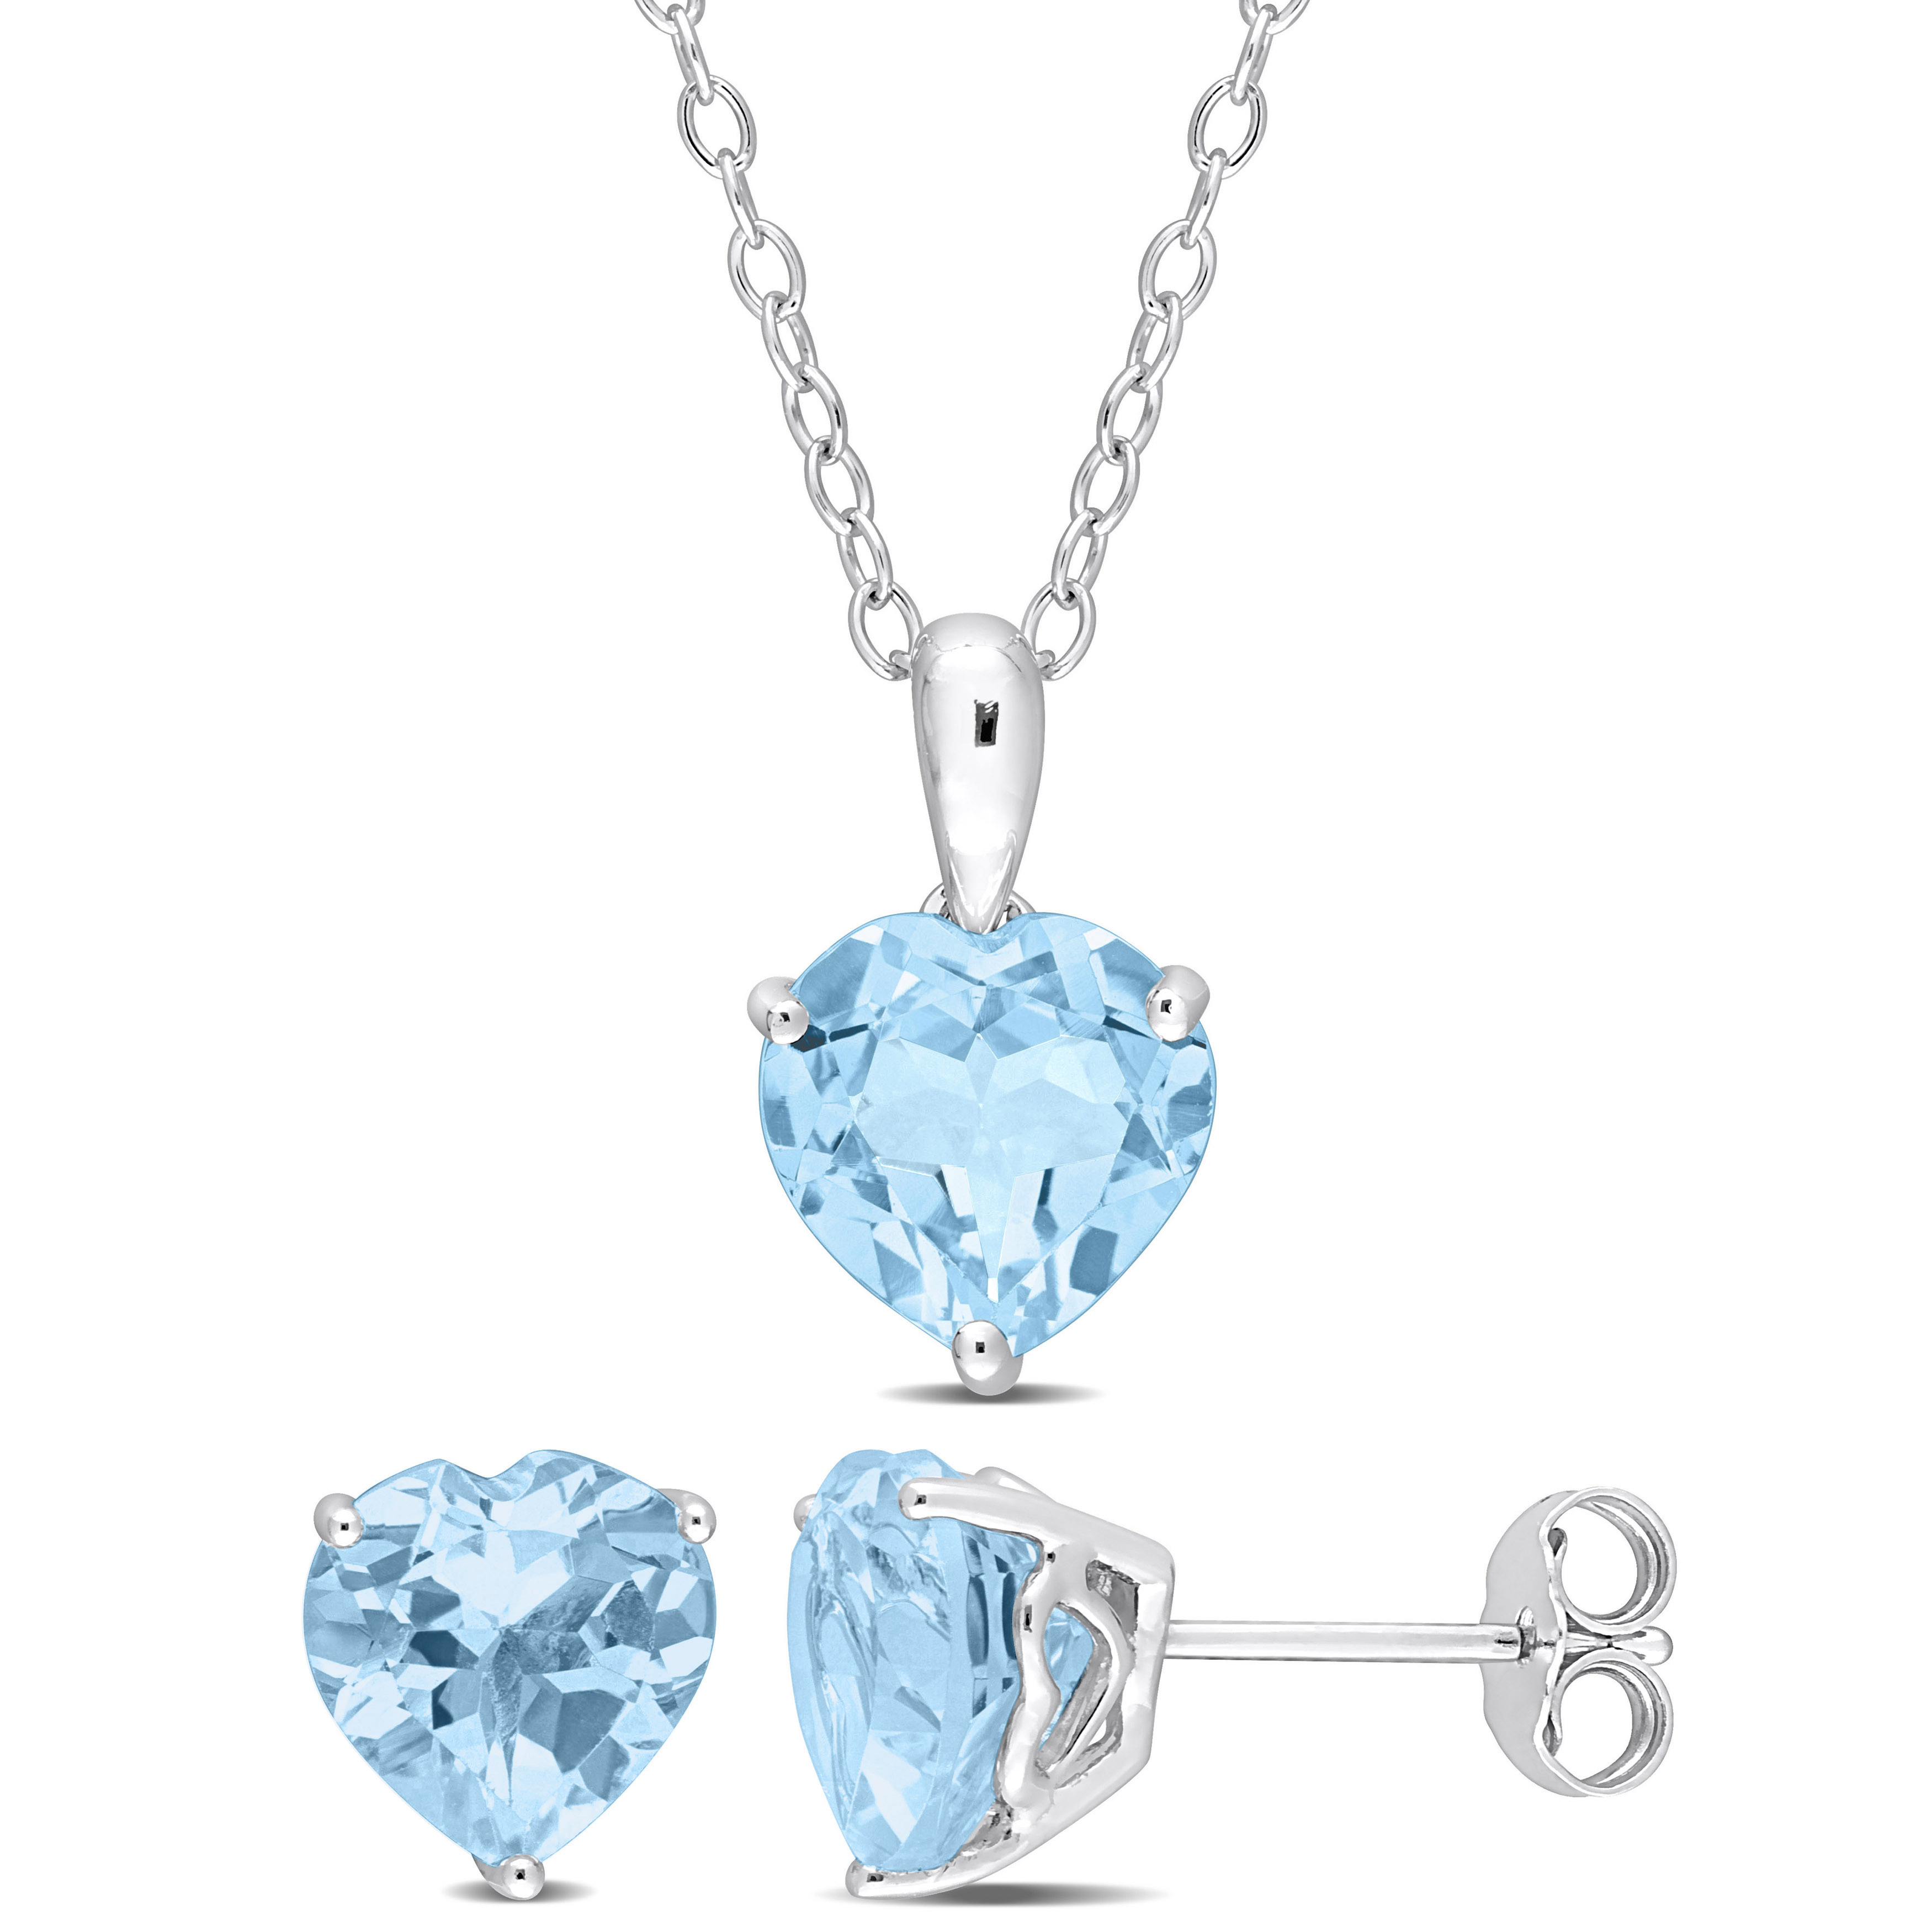 6 CT TGW Heart-Shape Sky Blue Topaz 2-Piece Solitaire Pendant with Chain and Stud Earrings Set in Sterling Silver